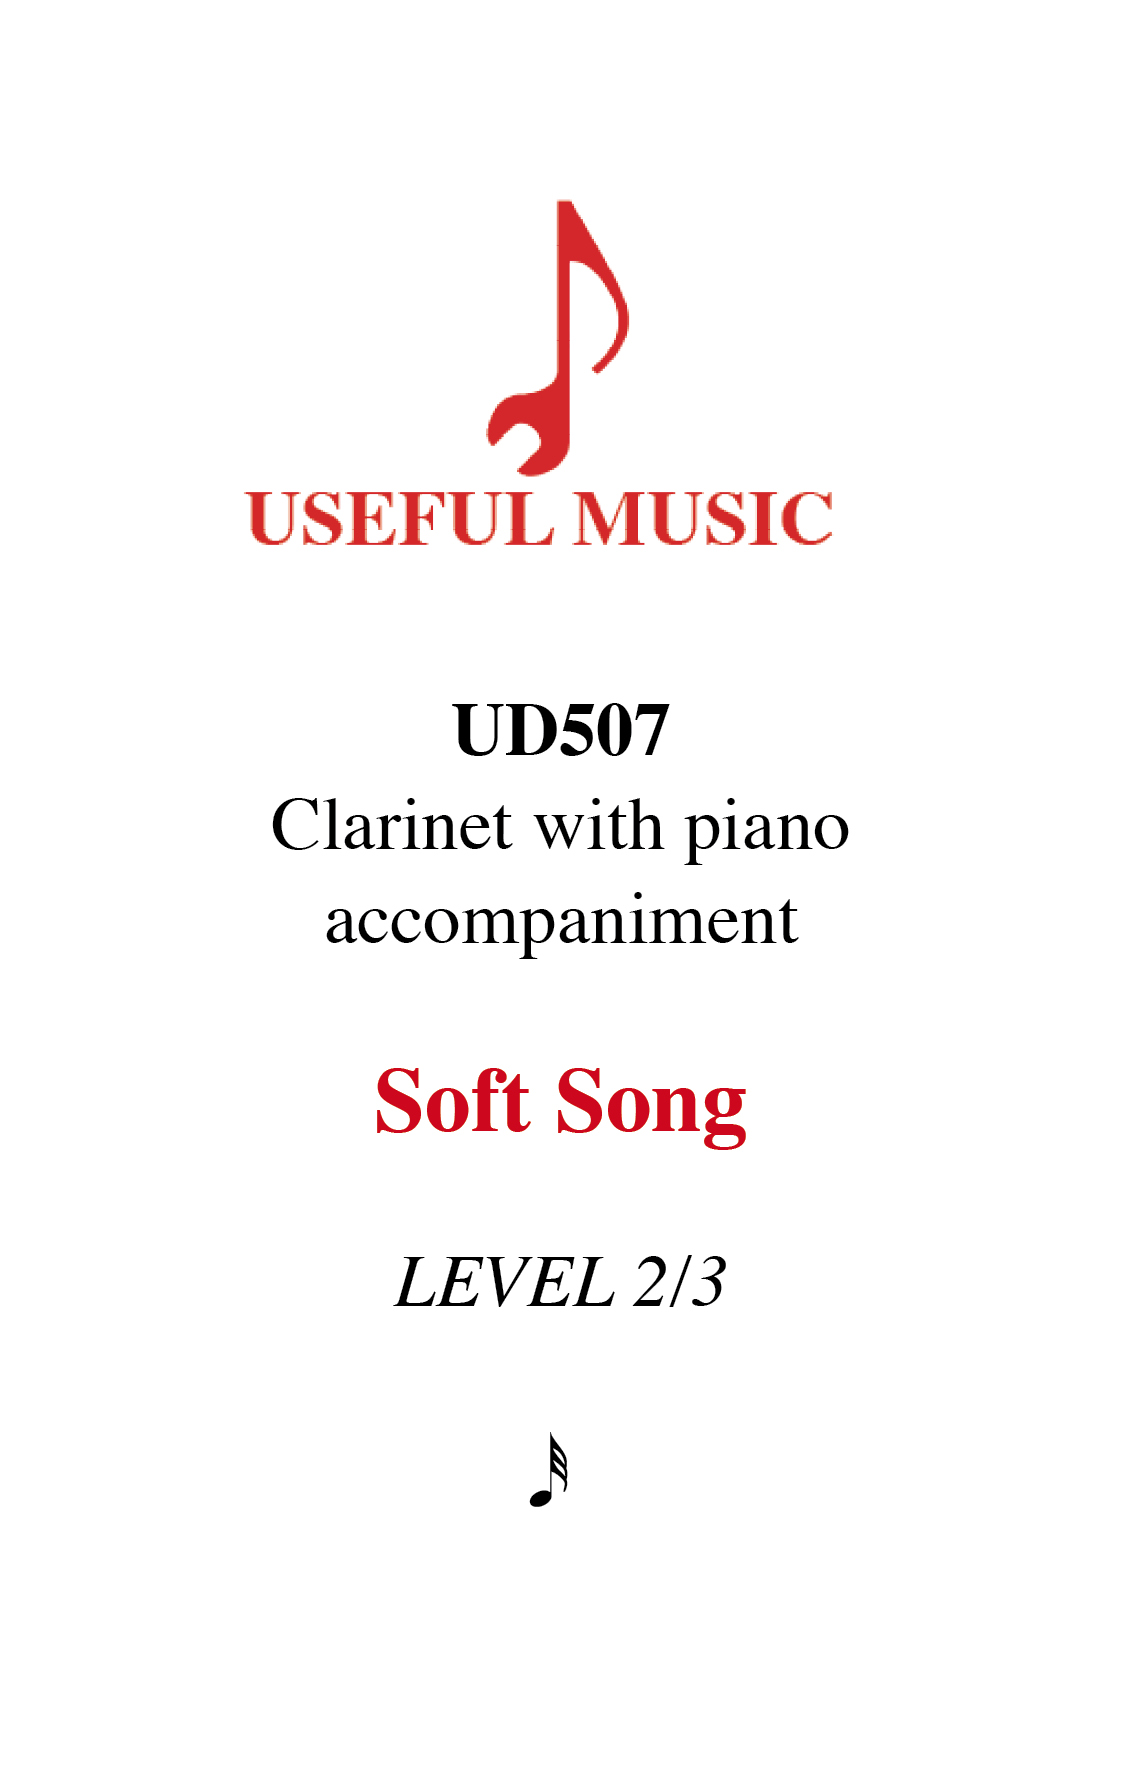 Soft Song - Clarinet with piano accompaniment